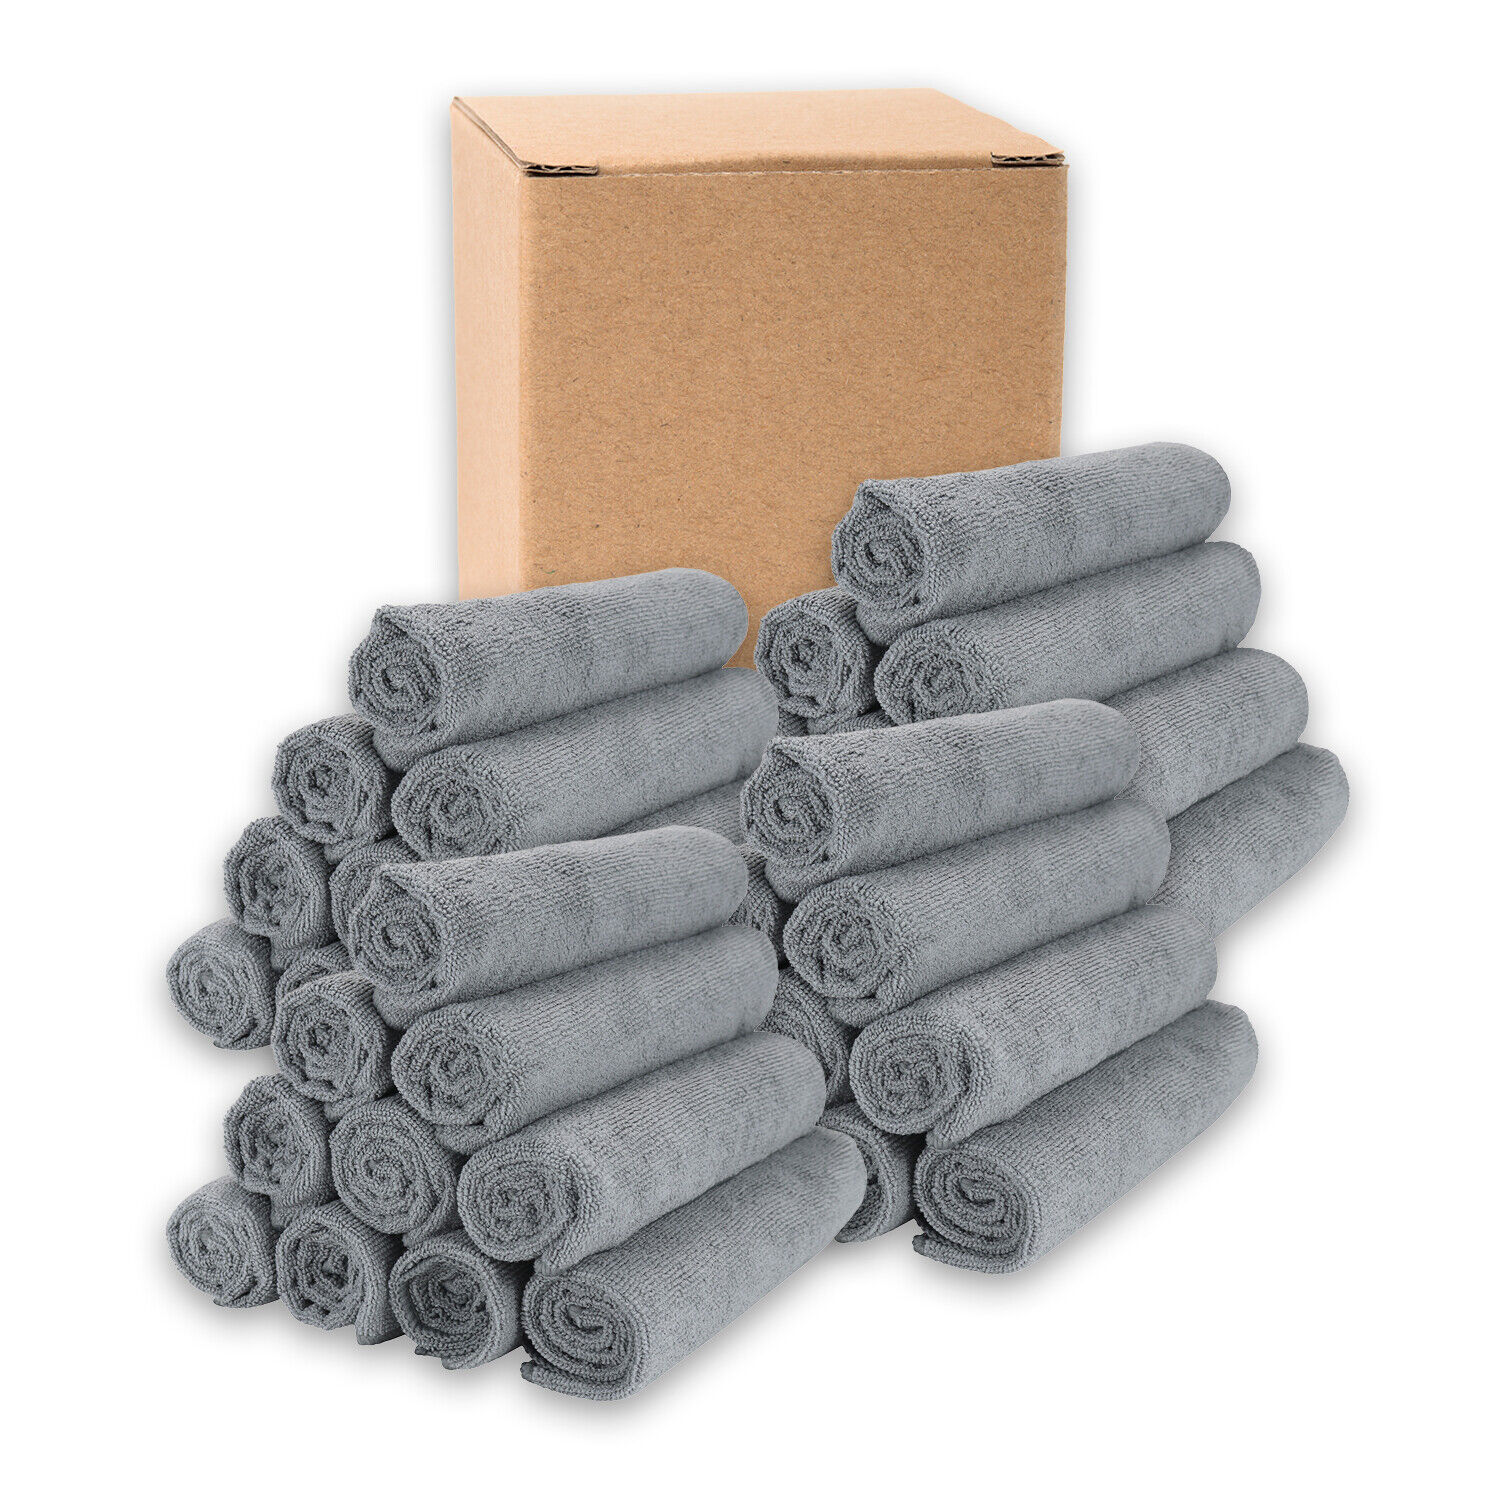 Microfiber Hand Towels 12 Packs - 16 x 27 Soft Reusable Absorbent Color Options Arkwright Does Not Apply - фотография #6